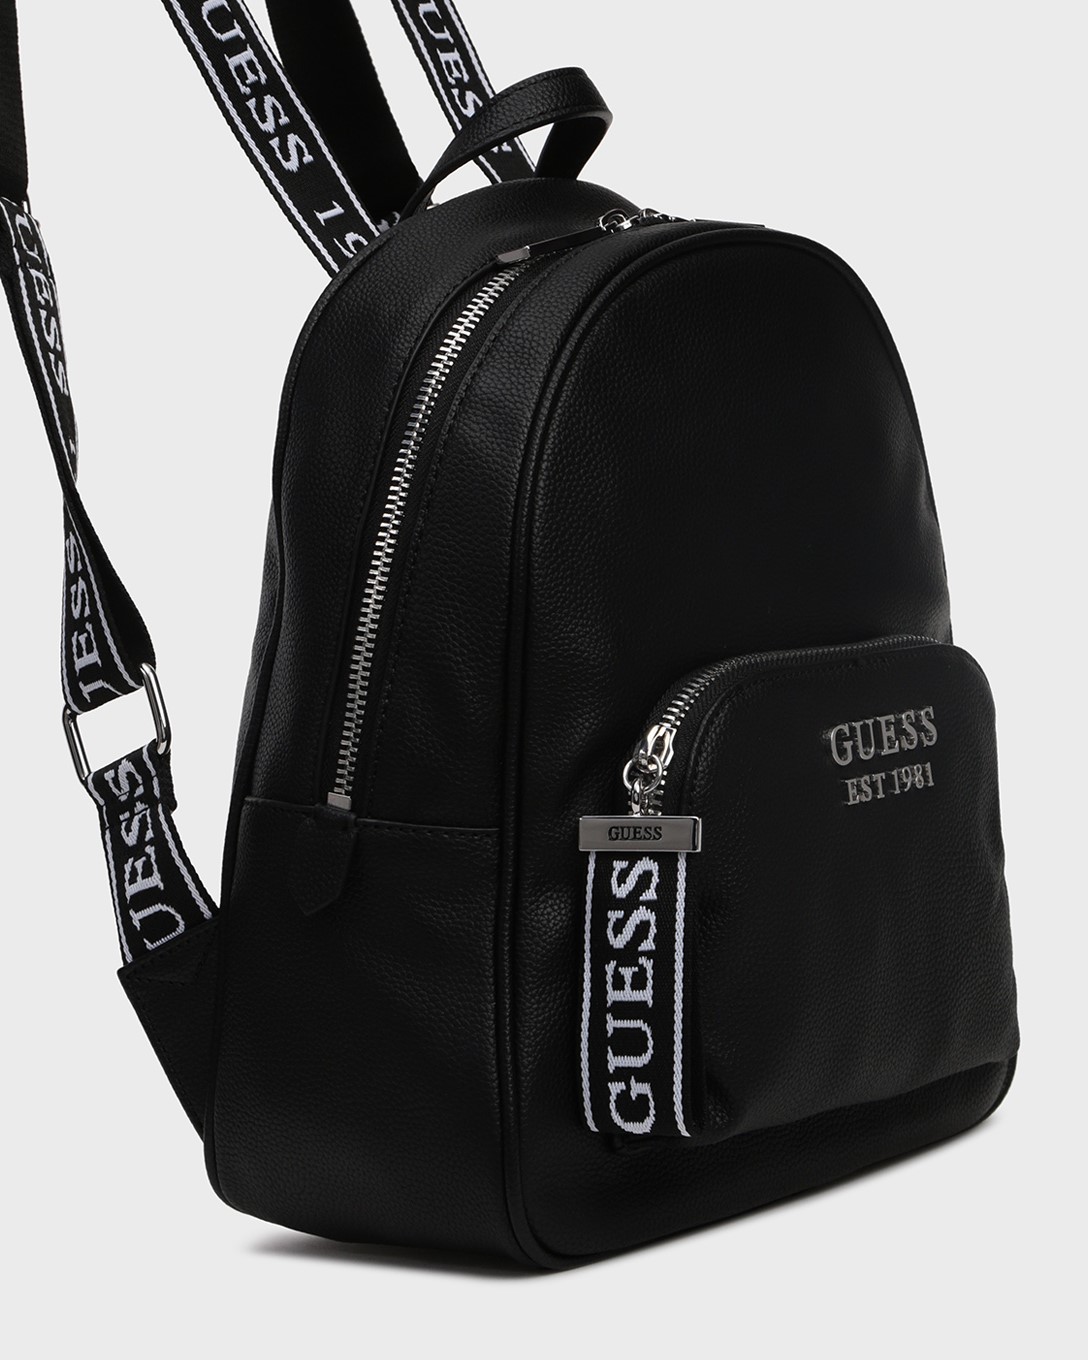 BALO GUESS BACKPACK 3